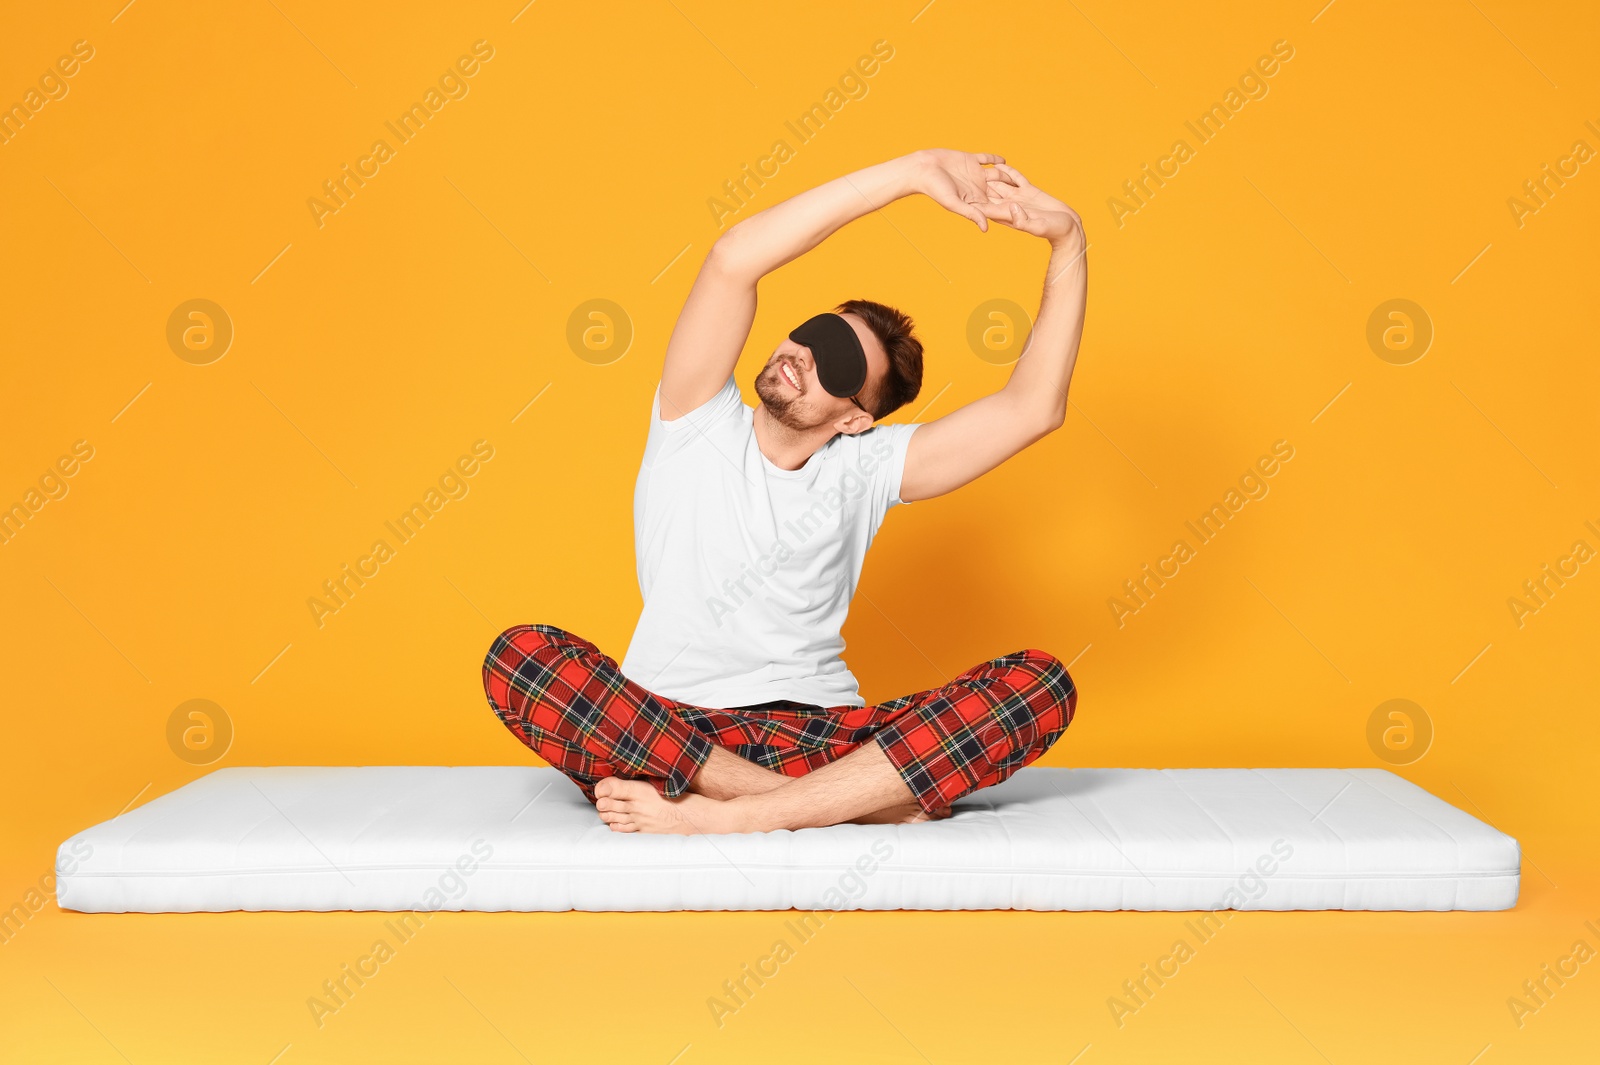 Photo of Man in sleeping mask sitting on soft mattress and stretching against orange background